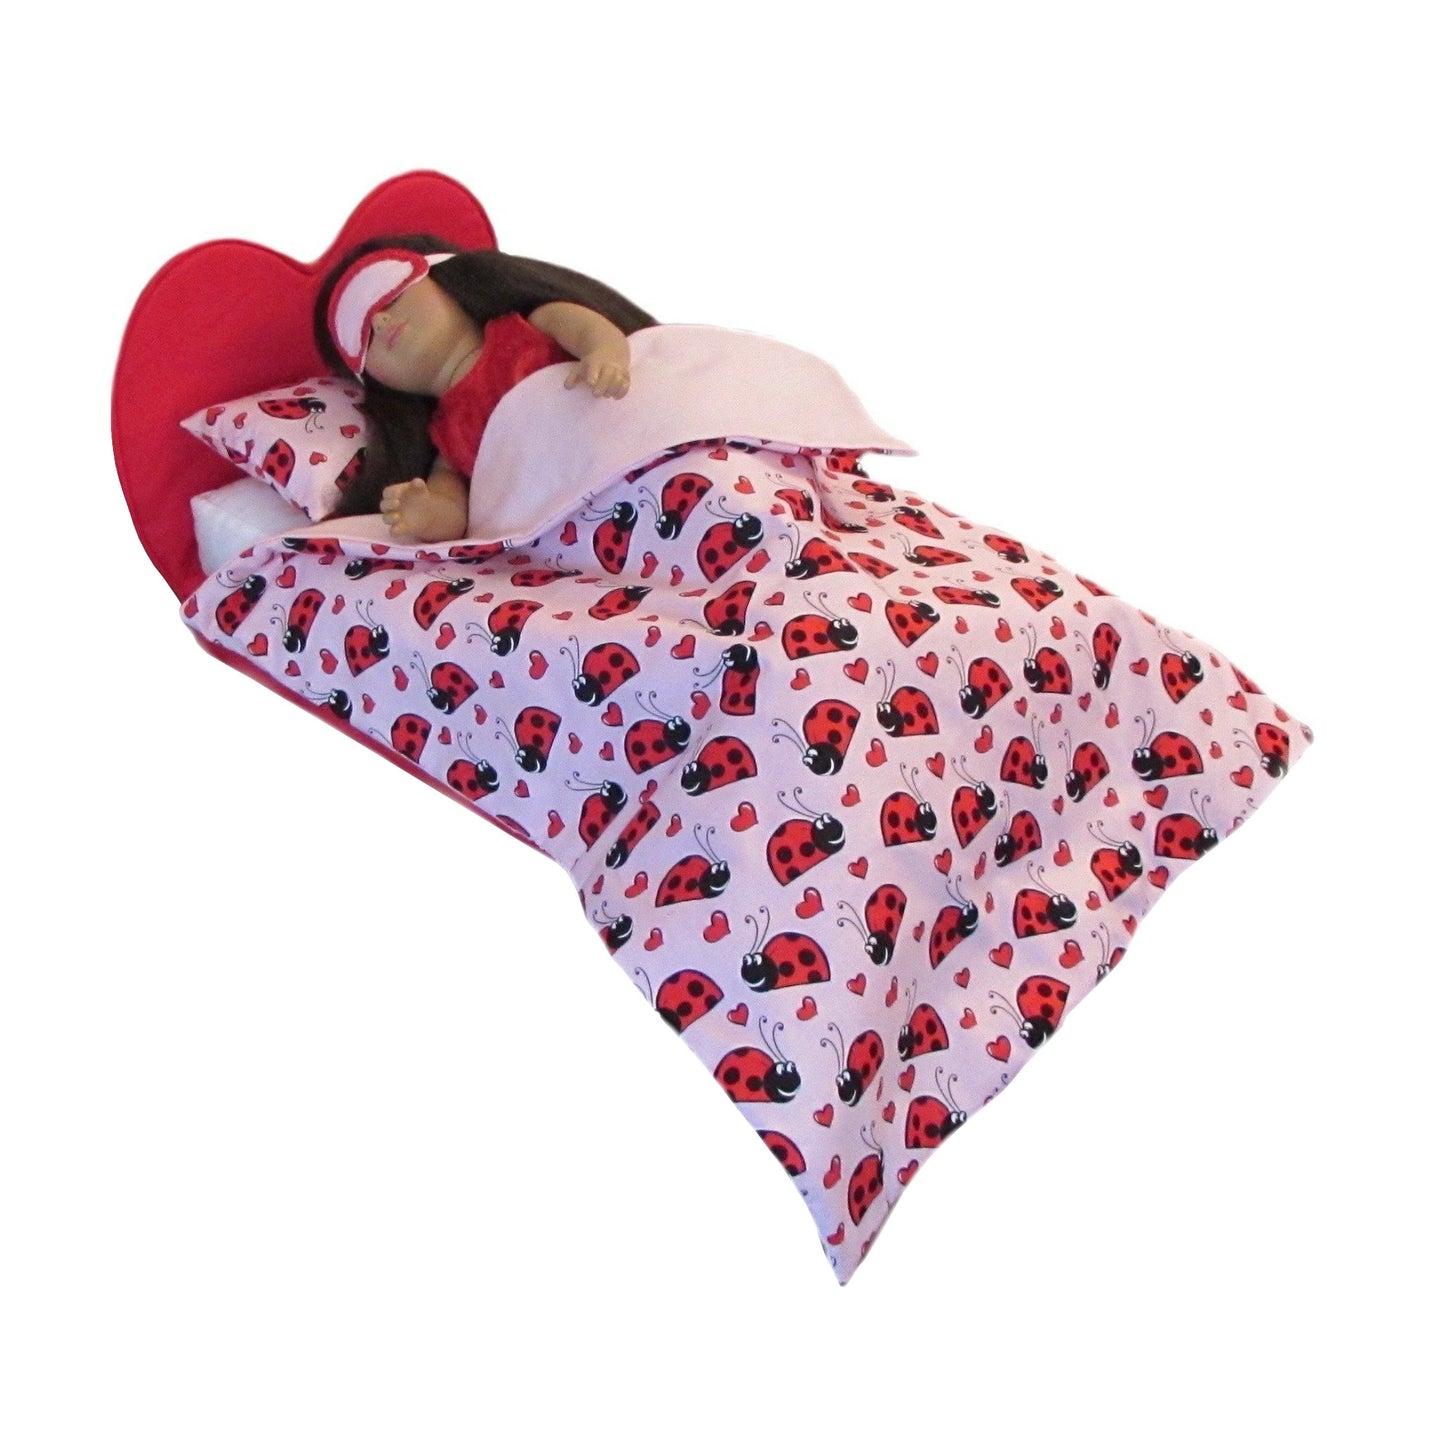 Light Pink with Red Trim Doll Sleep Mask, Red Heart Doll Bed, doll, and lady bug bedding for 18-inch dolls